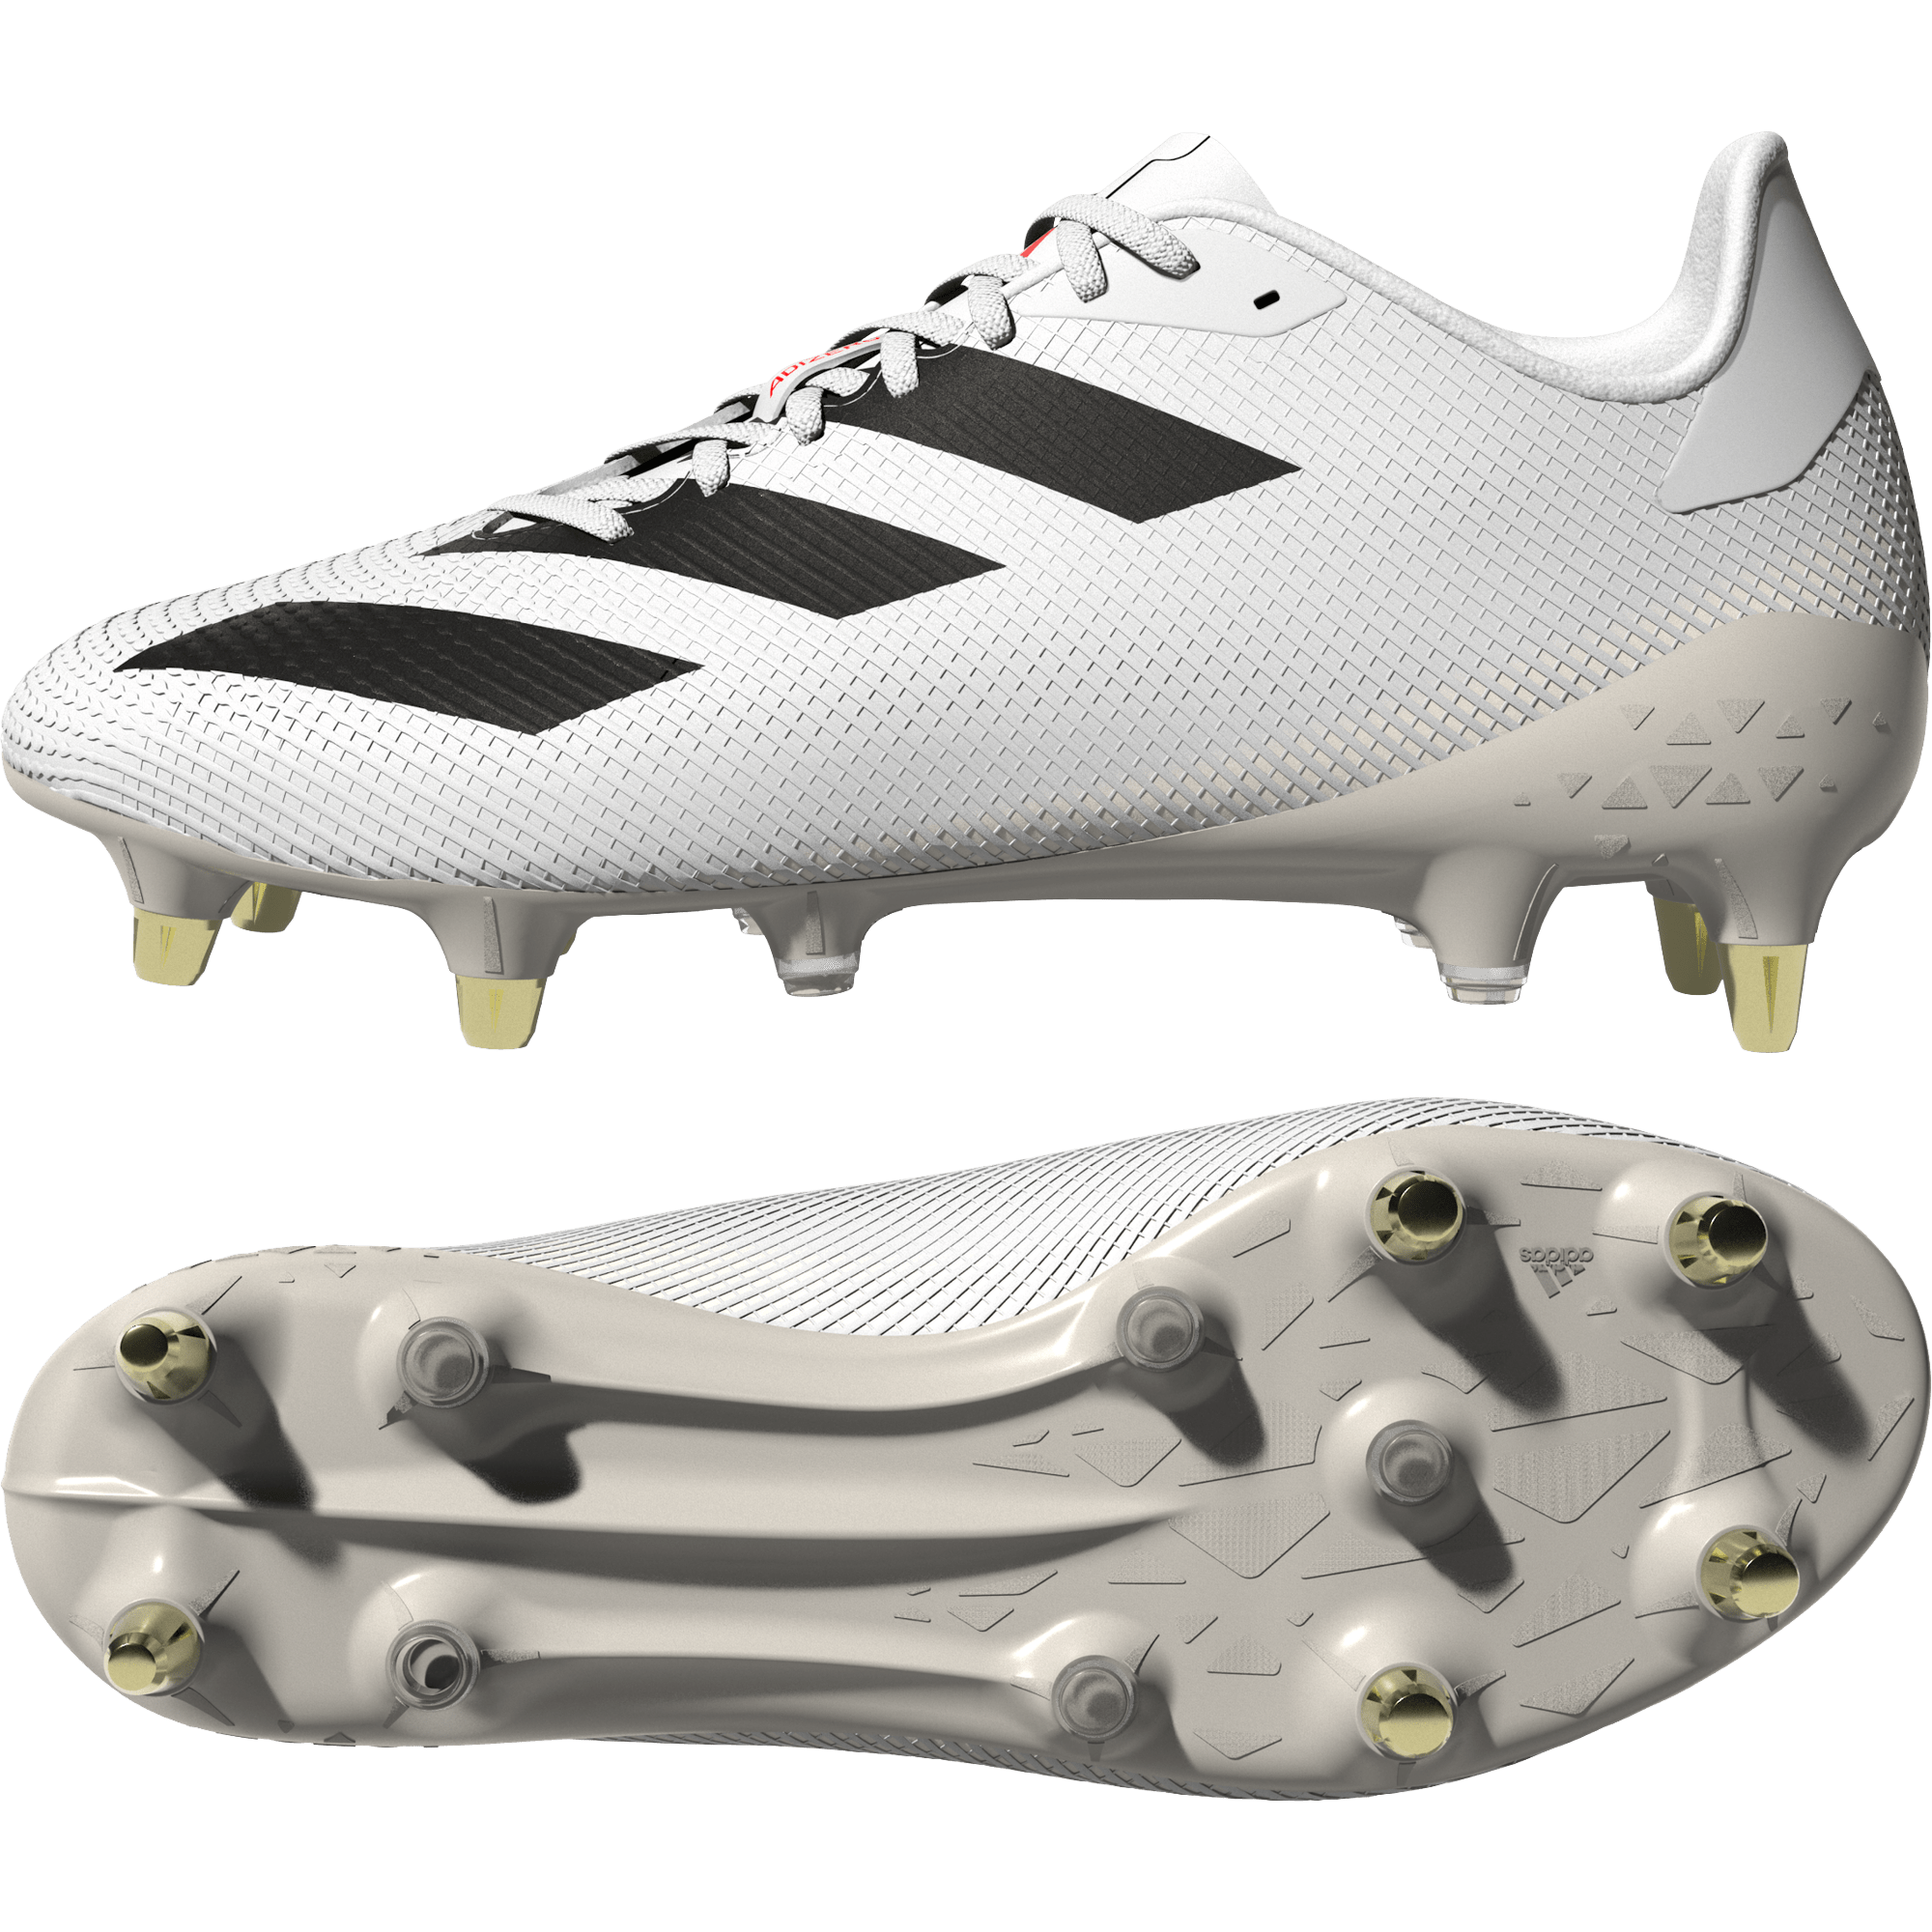 adidas Adizero RS7 Rugby Cleat - Soft Ground Boot - White - SKU 